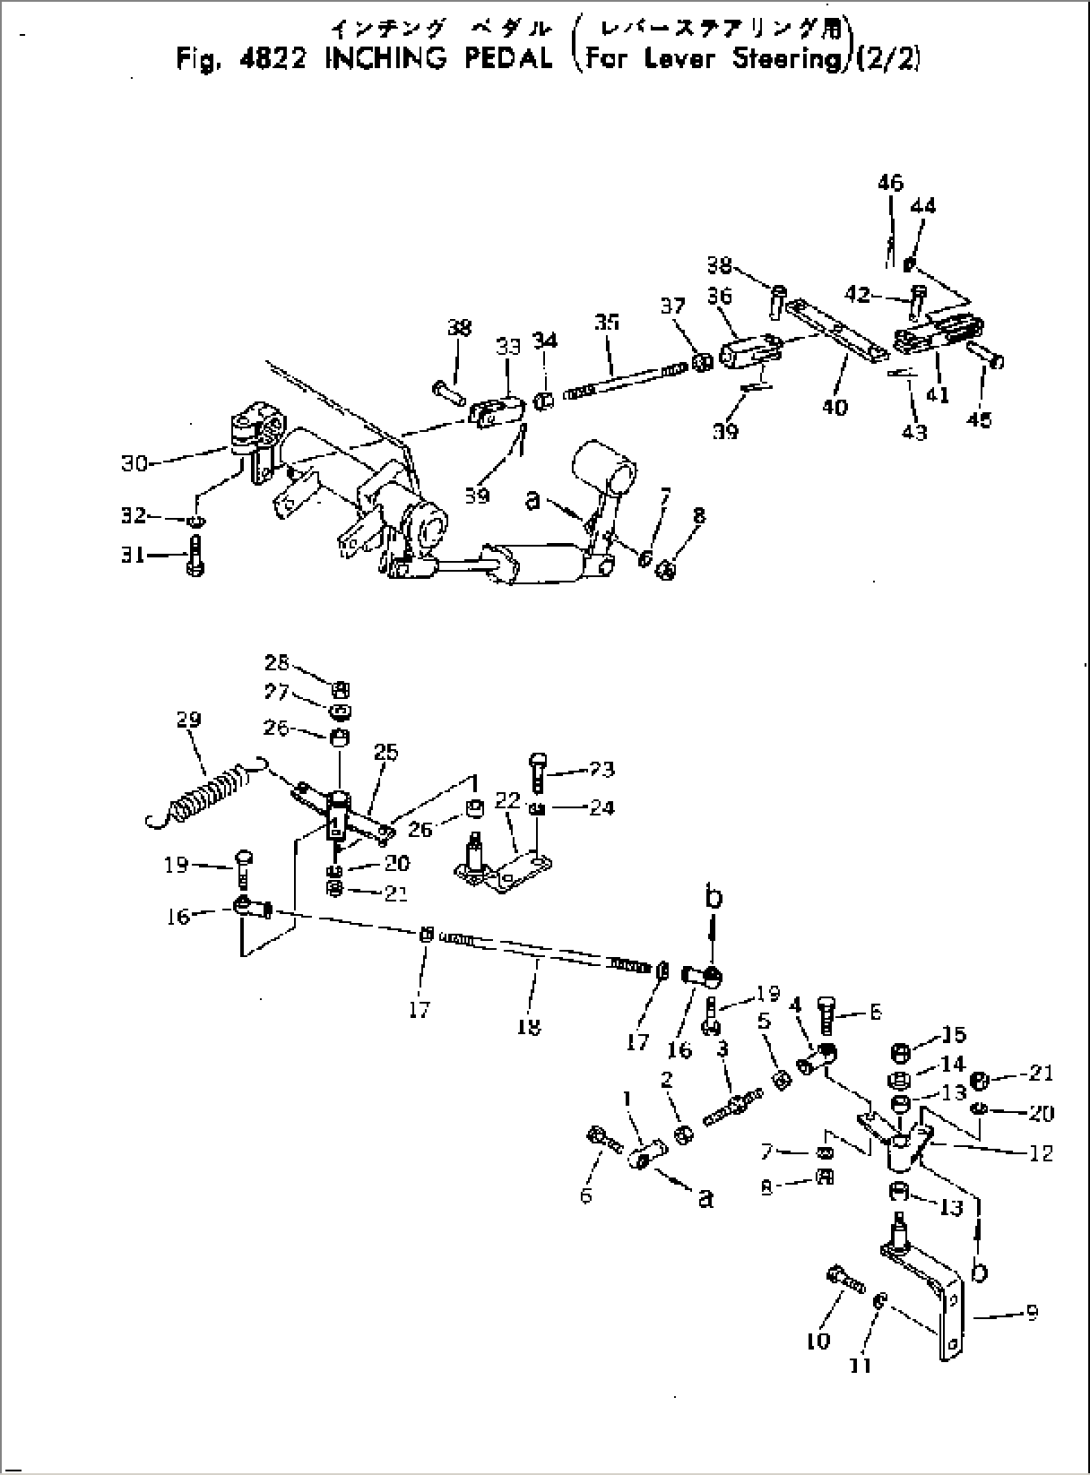 INCHING PEDAL (FOR LEVER STEERING) (2/2)